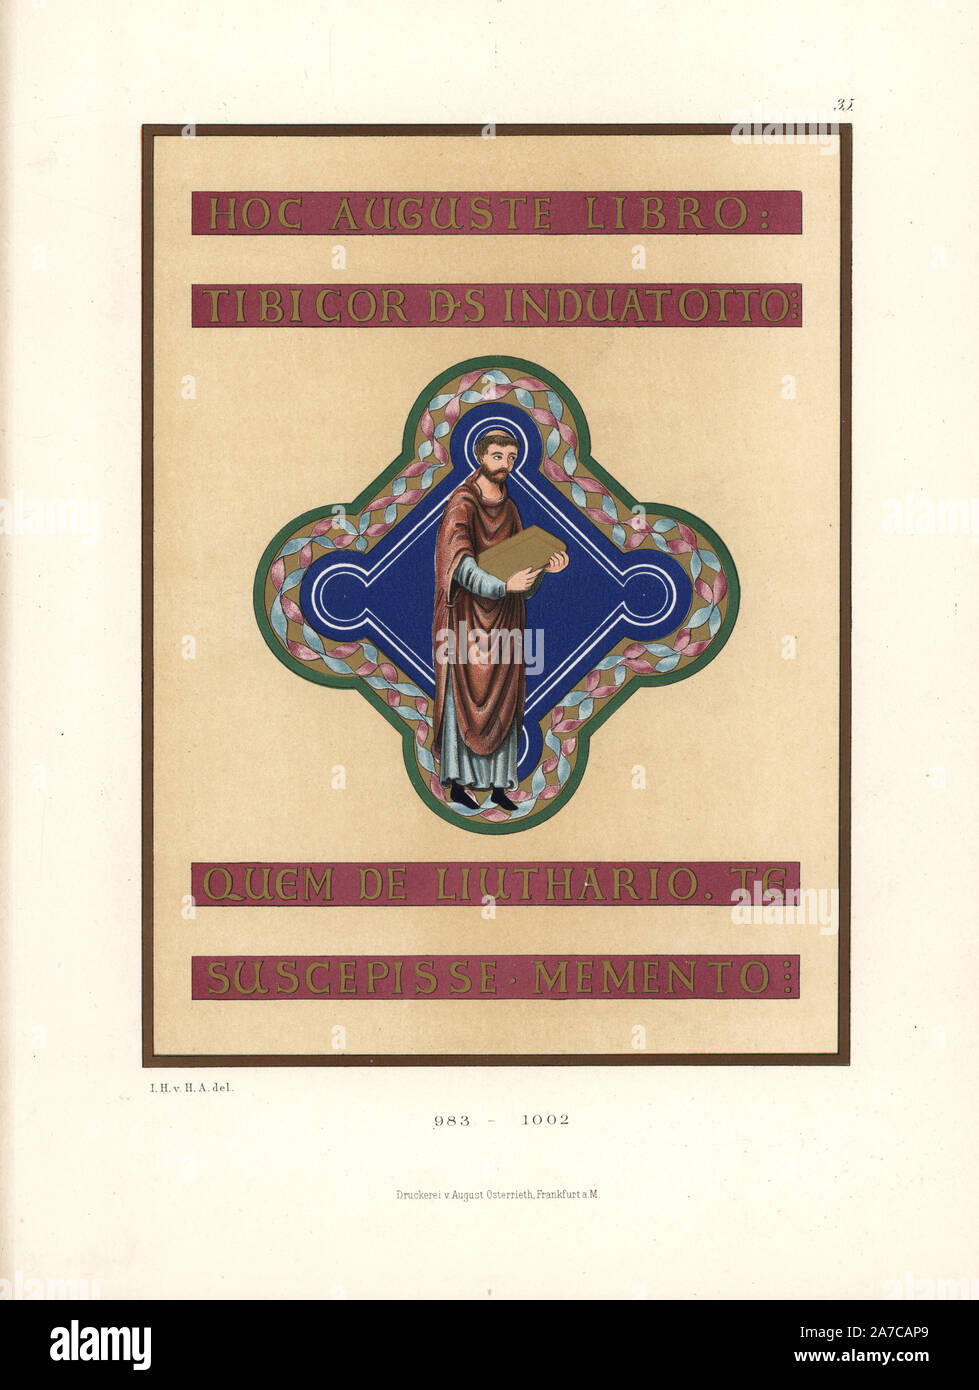 Title page from a book of gospels given by Otto III to Aachen cathedral, illuminated by the monk Liuthard. 'May God, clothe thy heart, emperor Otto, with this book; Forget not that you received it from Liuthard.' Chromolithograph from Hefner-Alteneck's 'Costumes, Artworks and Appliances from the Middle Ages to the 17th Century,' Frankfurt, 1879. Illustration by Dr. Jakob Heinrich von Hefner-Alteneck and published by Heinrich Keller. Hefner-Alteneck (1811 - 1903) was a German museum curator, archaeologist, art historian, illustrator and etcher. Stock Photo